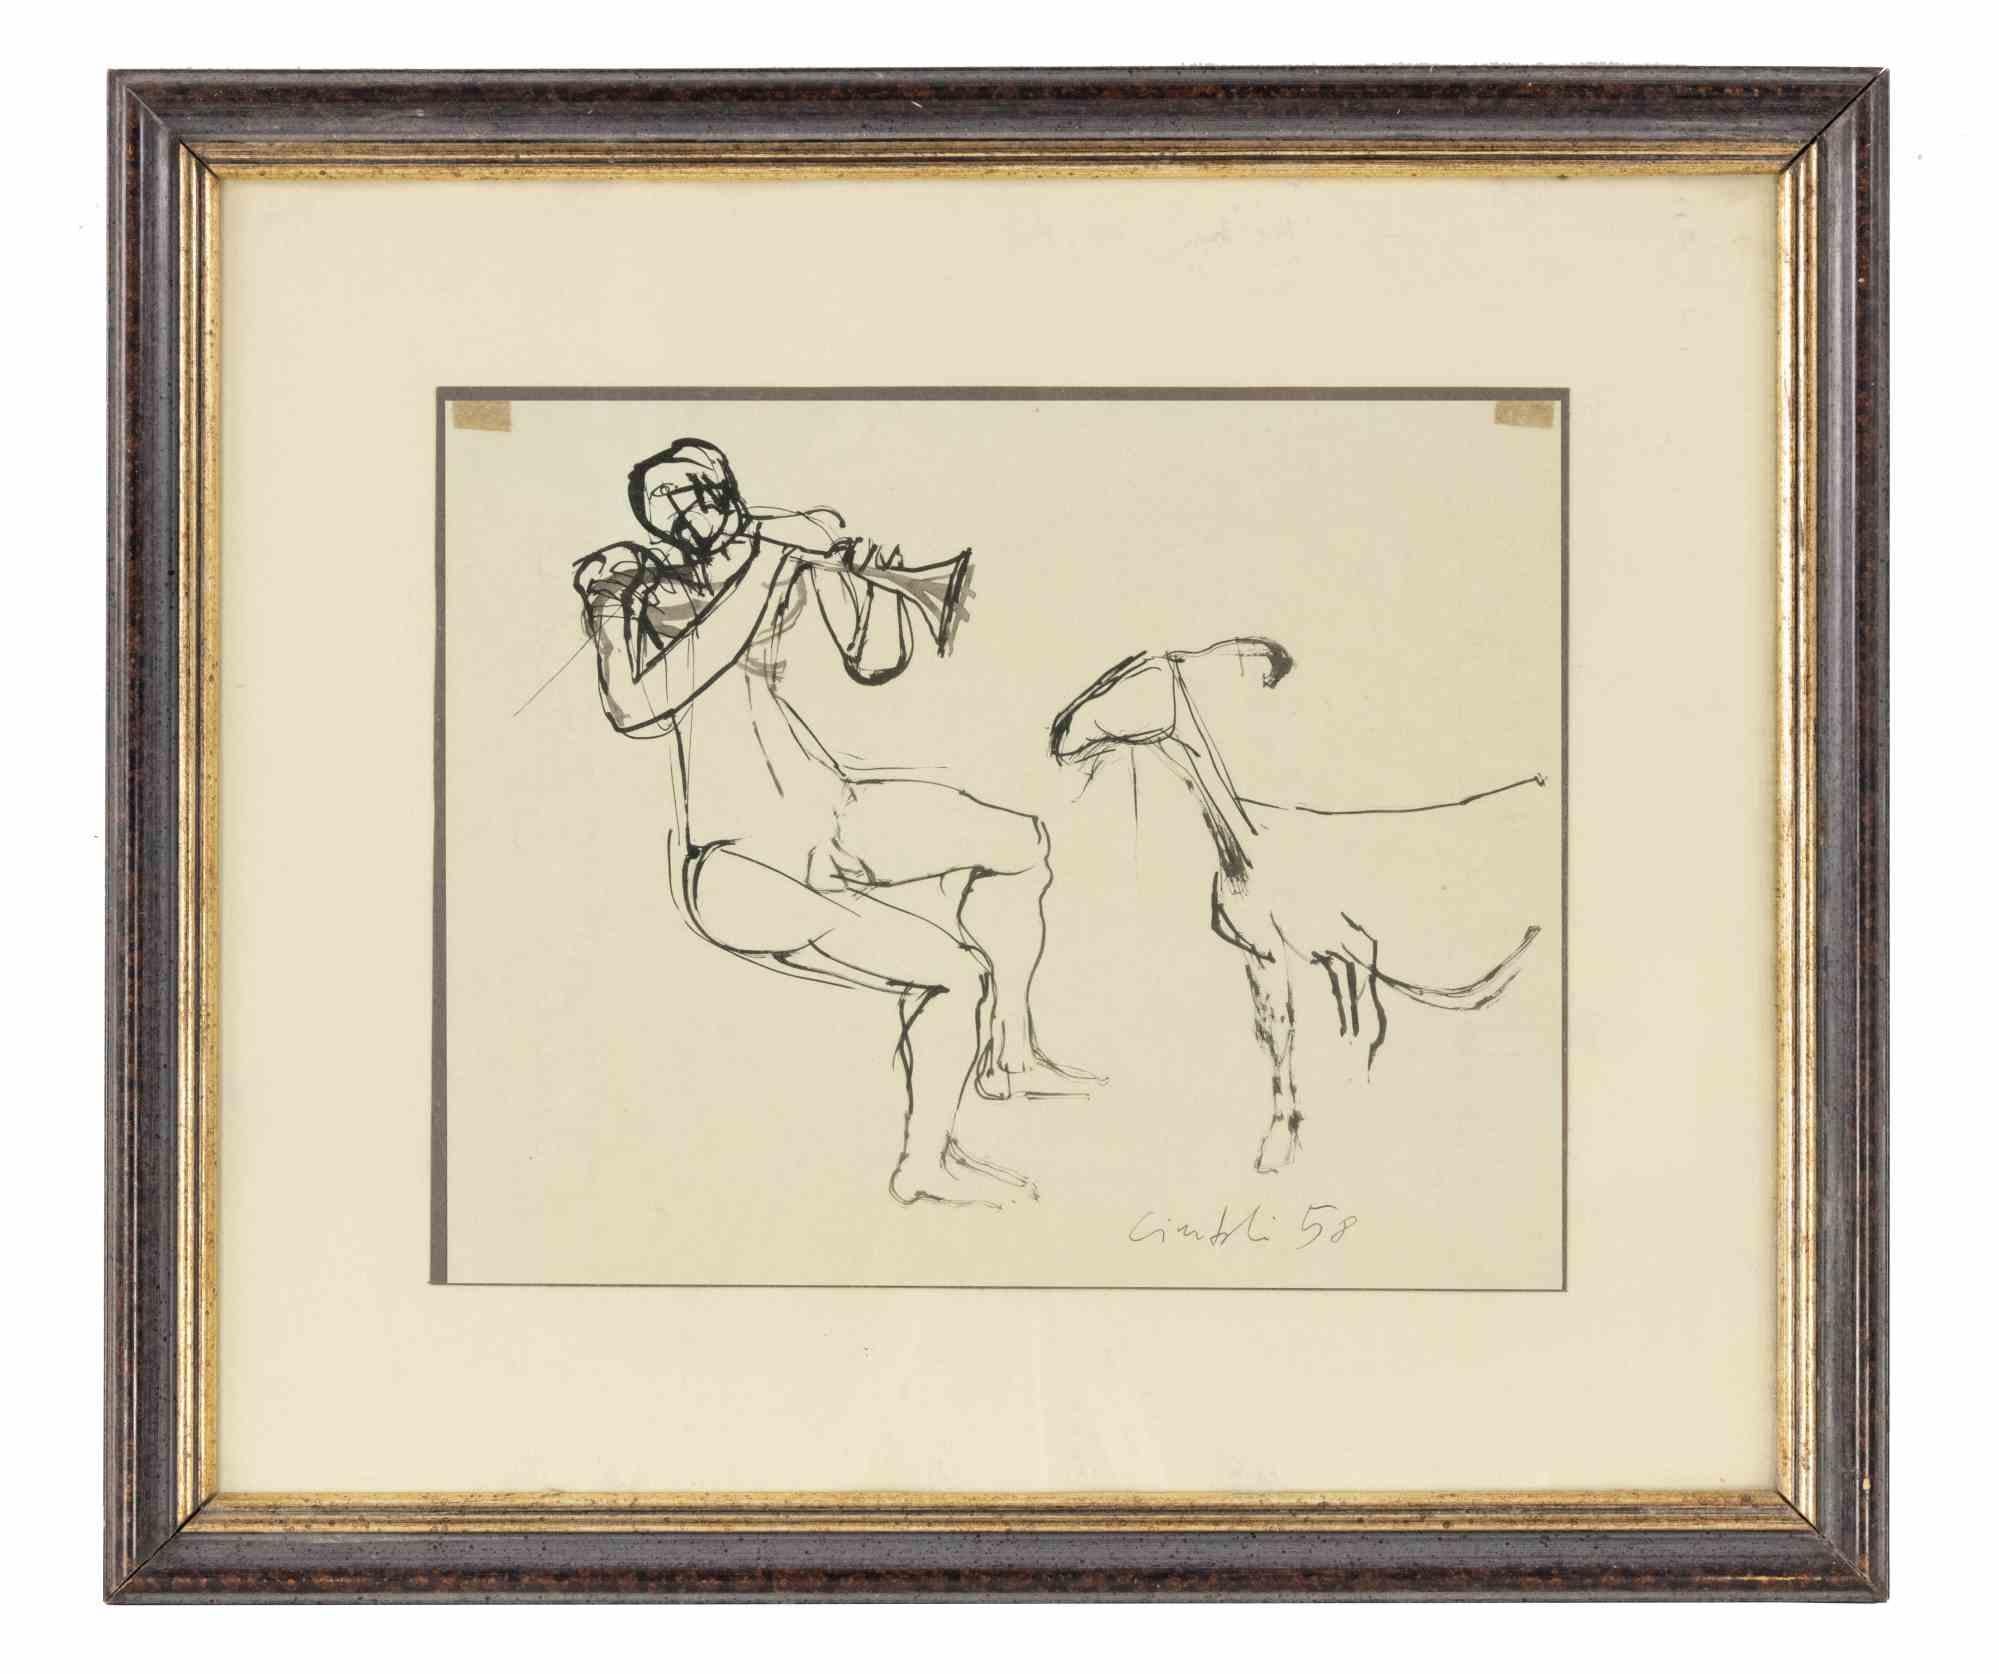 Sheperd is an original modern artowrk realized in 1958 by Claudio Cintoli.

China ink drawing.

Hand signed and dated on the lower margin.

Includes frame.